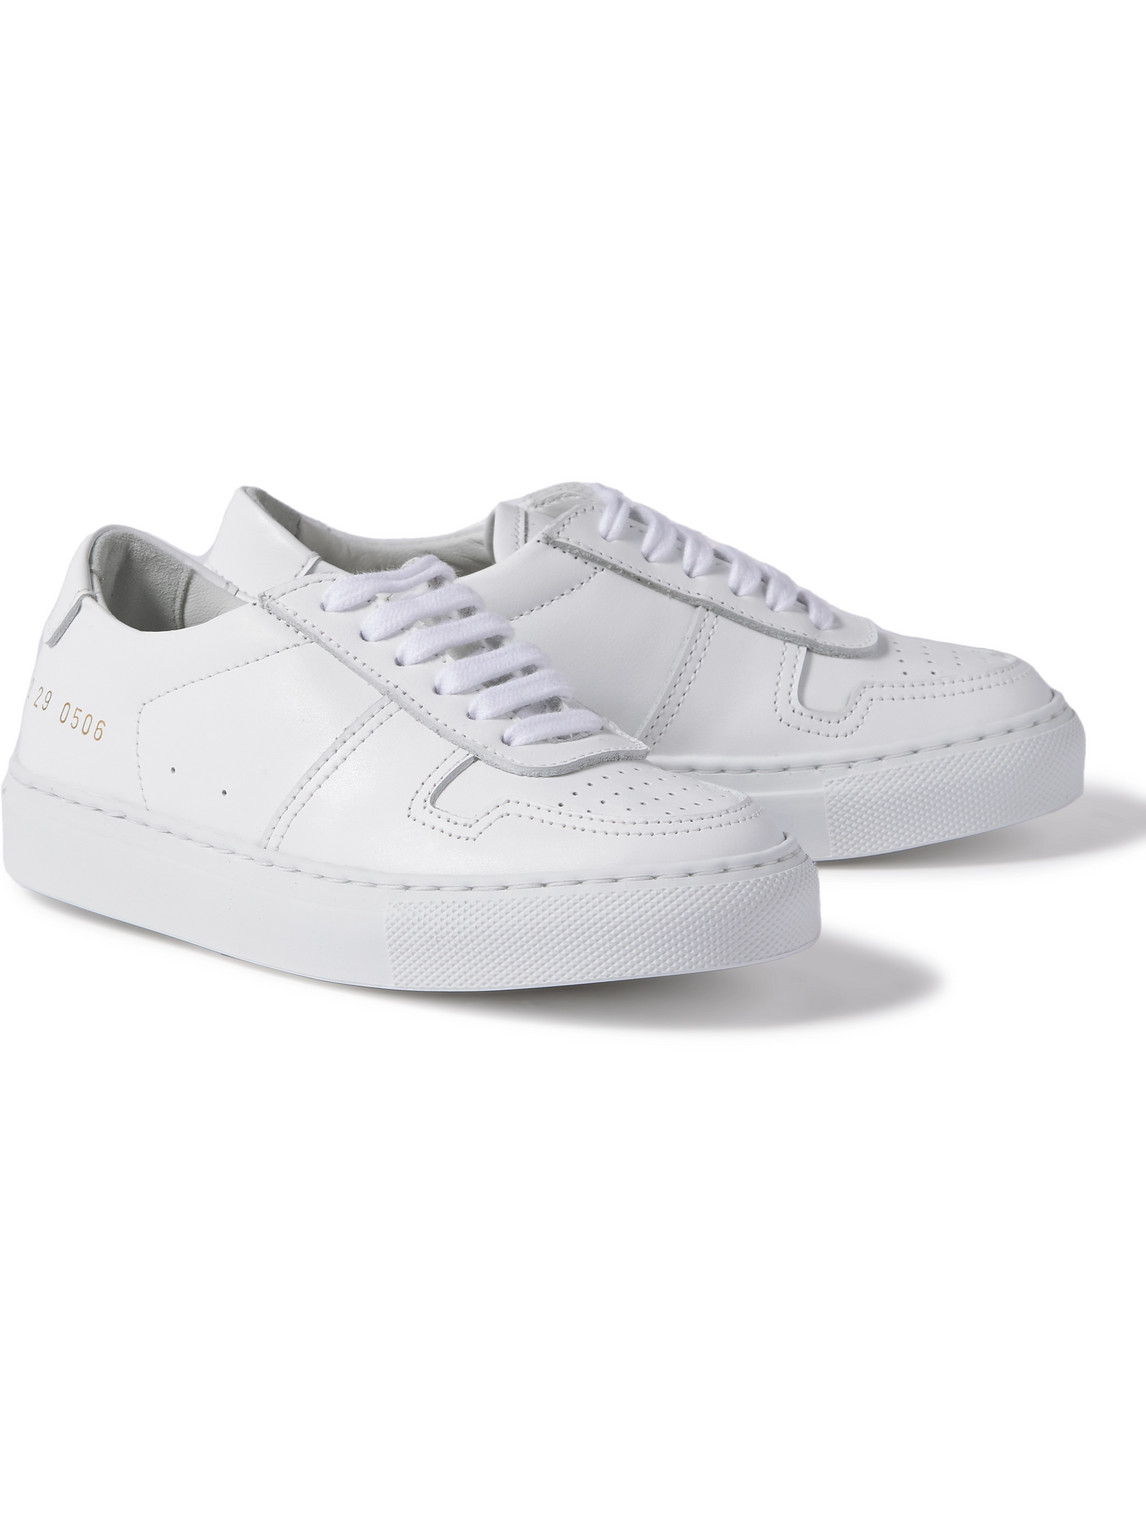 Common Projects Bball Perforated Leather Sneakers In White